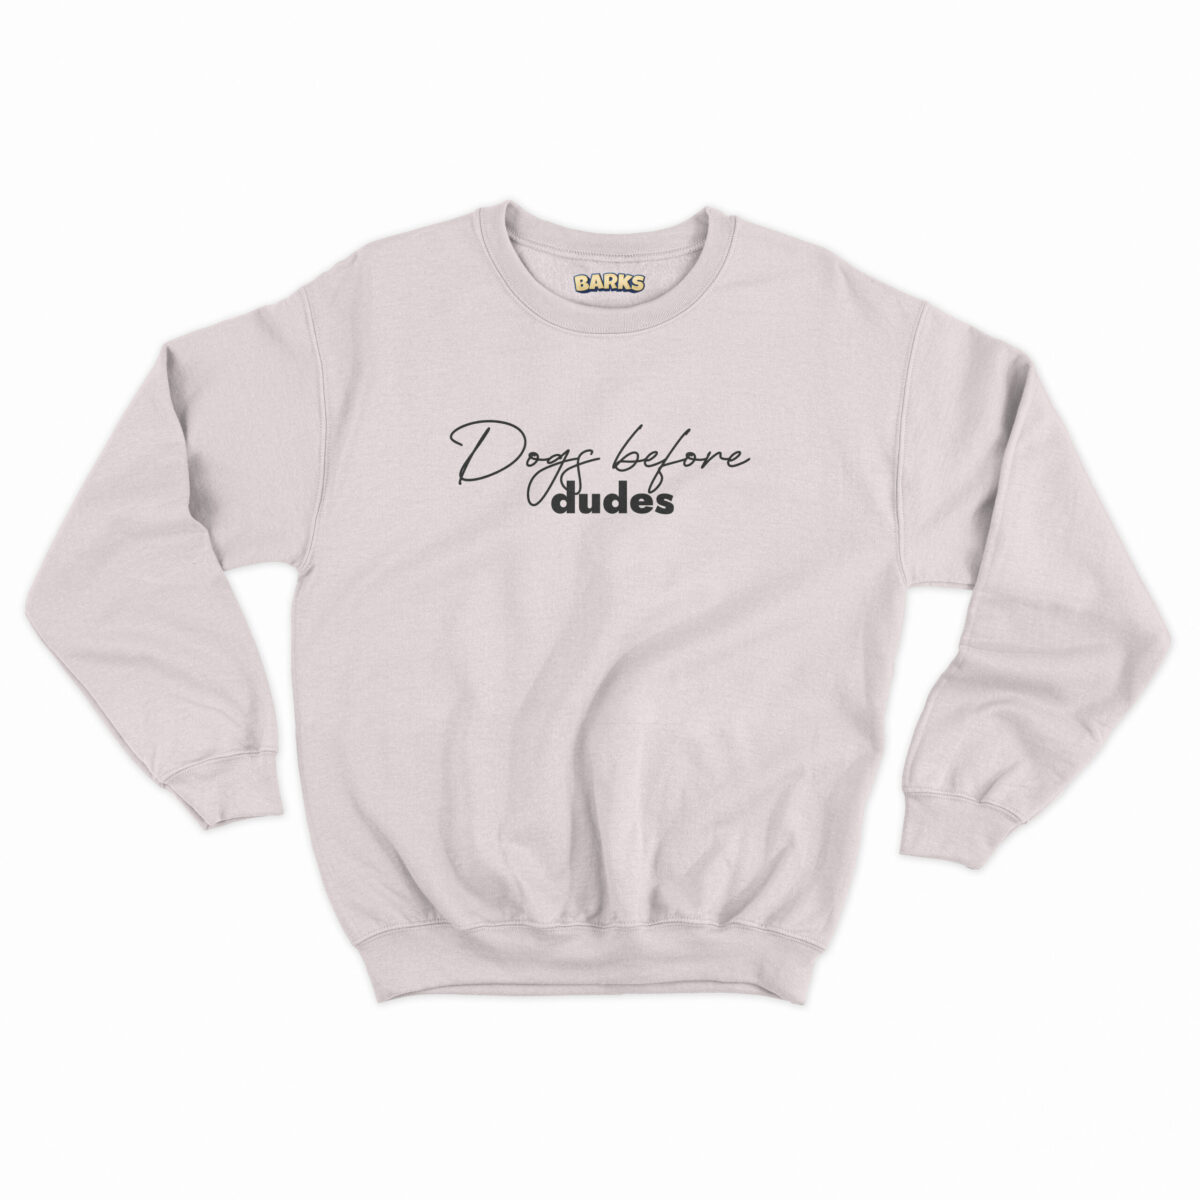 barks sweater dogs before dudes vintage white scaled